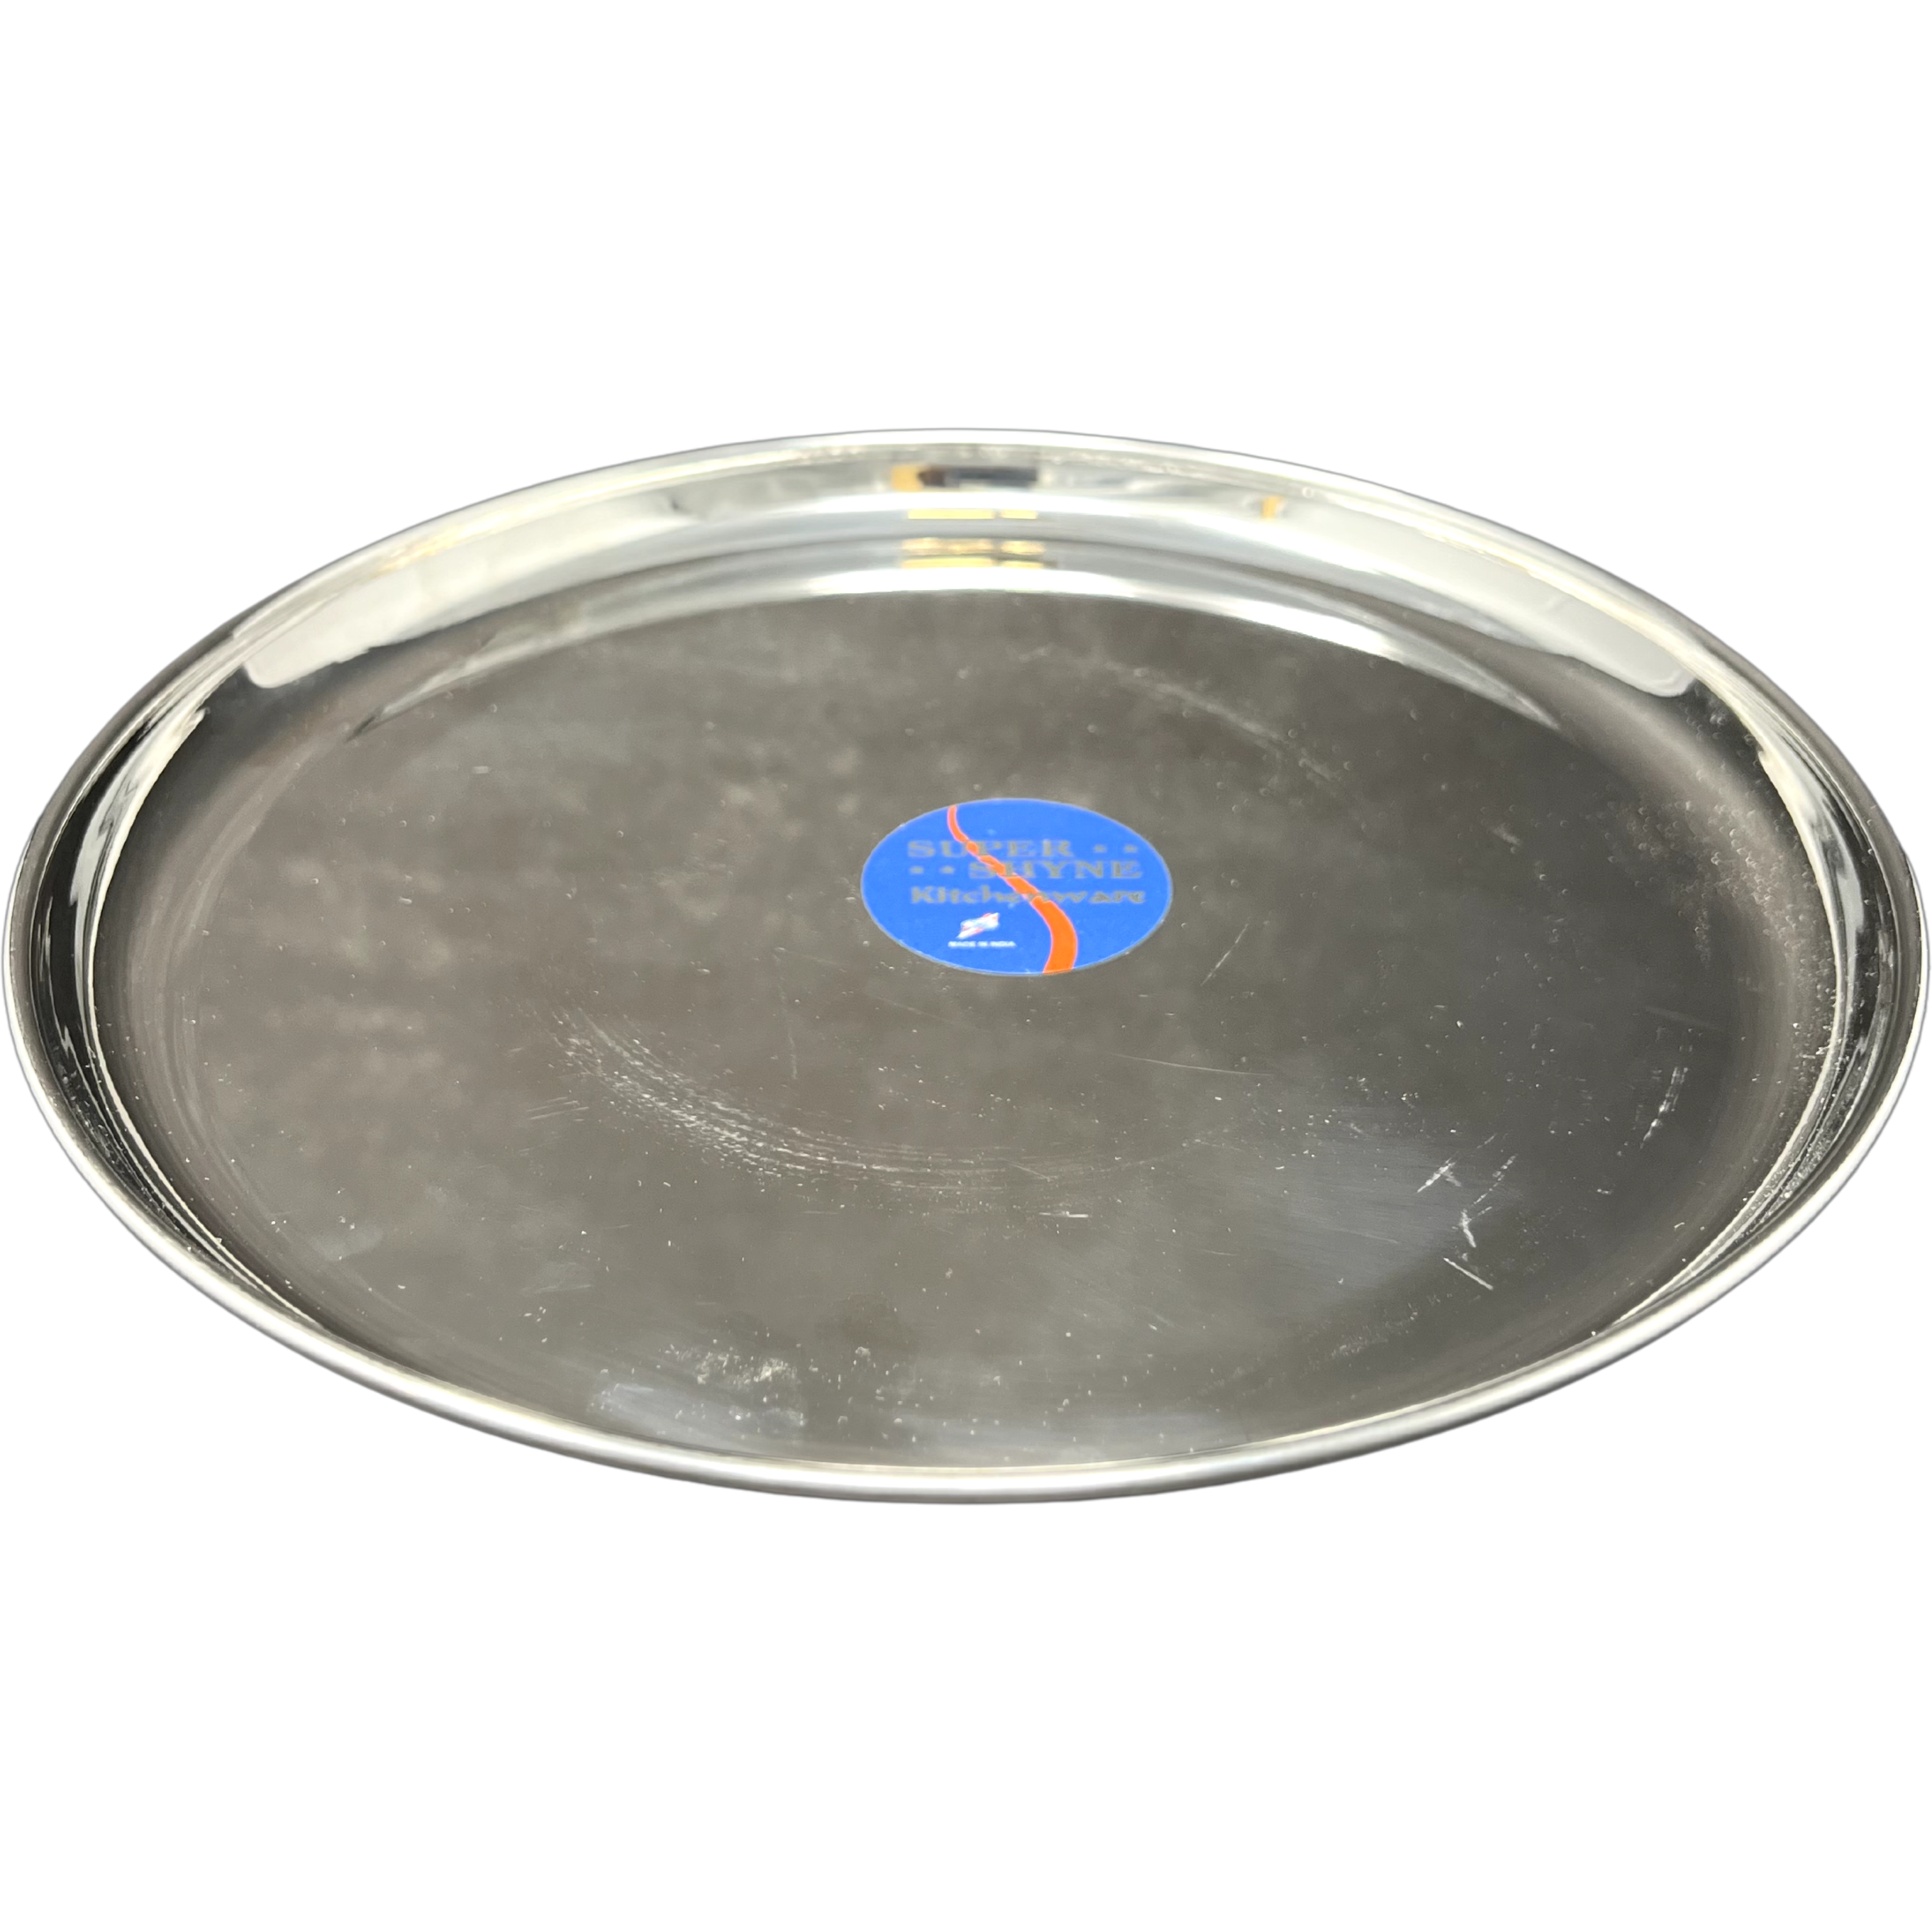 Case of 12 - Super Shyne Stainless Steel Lunch Round Plate - 10 Inch